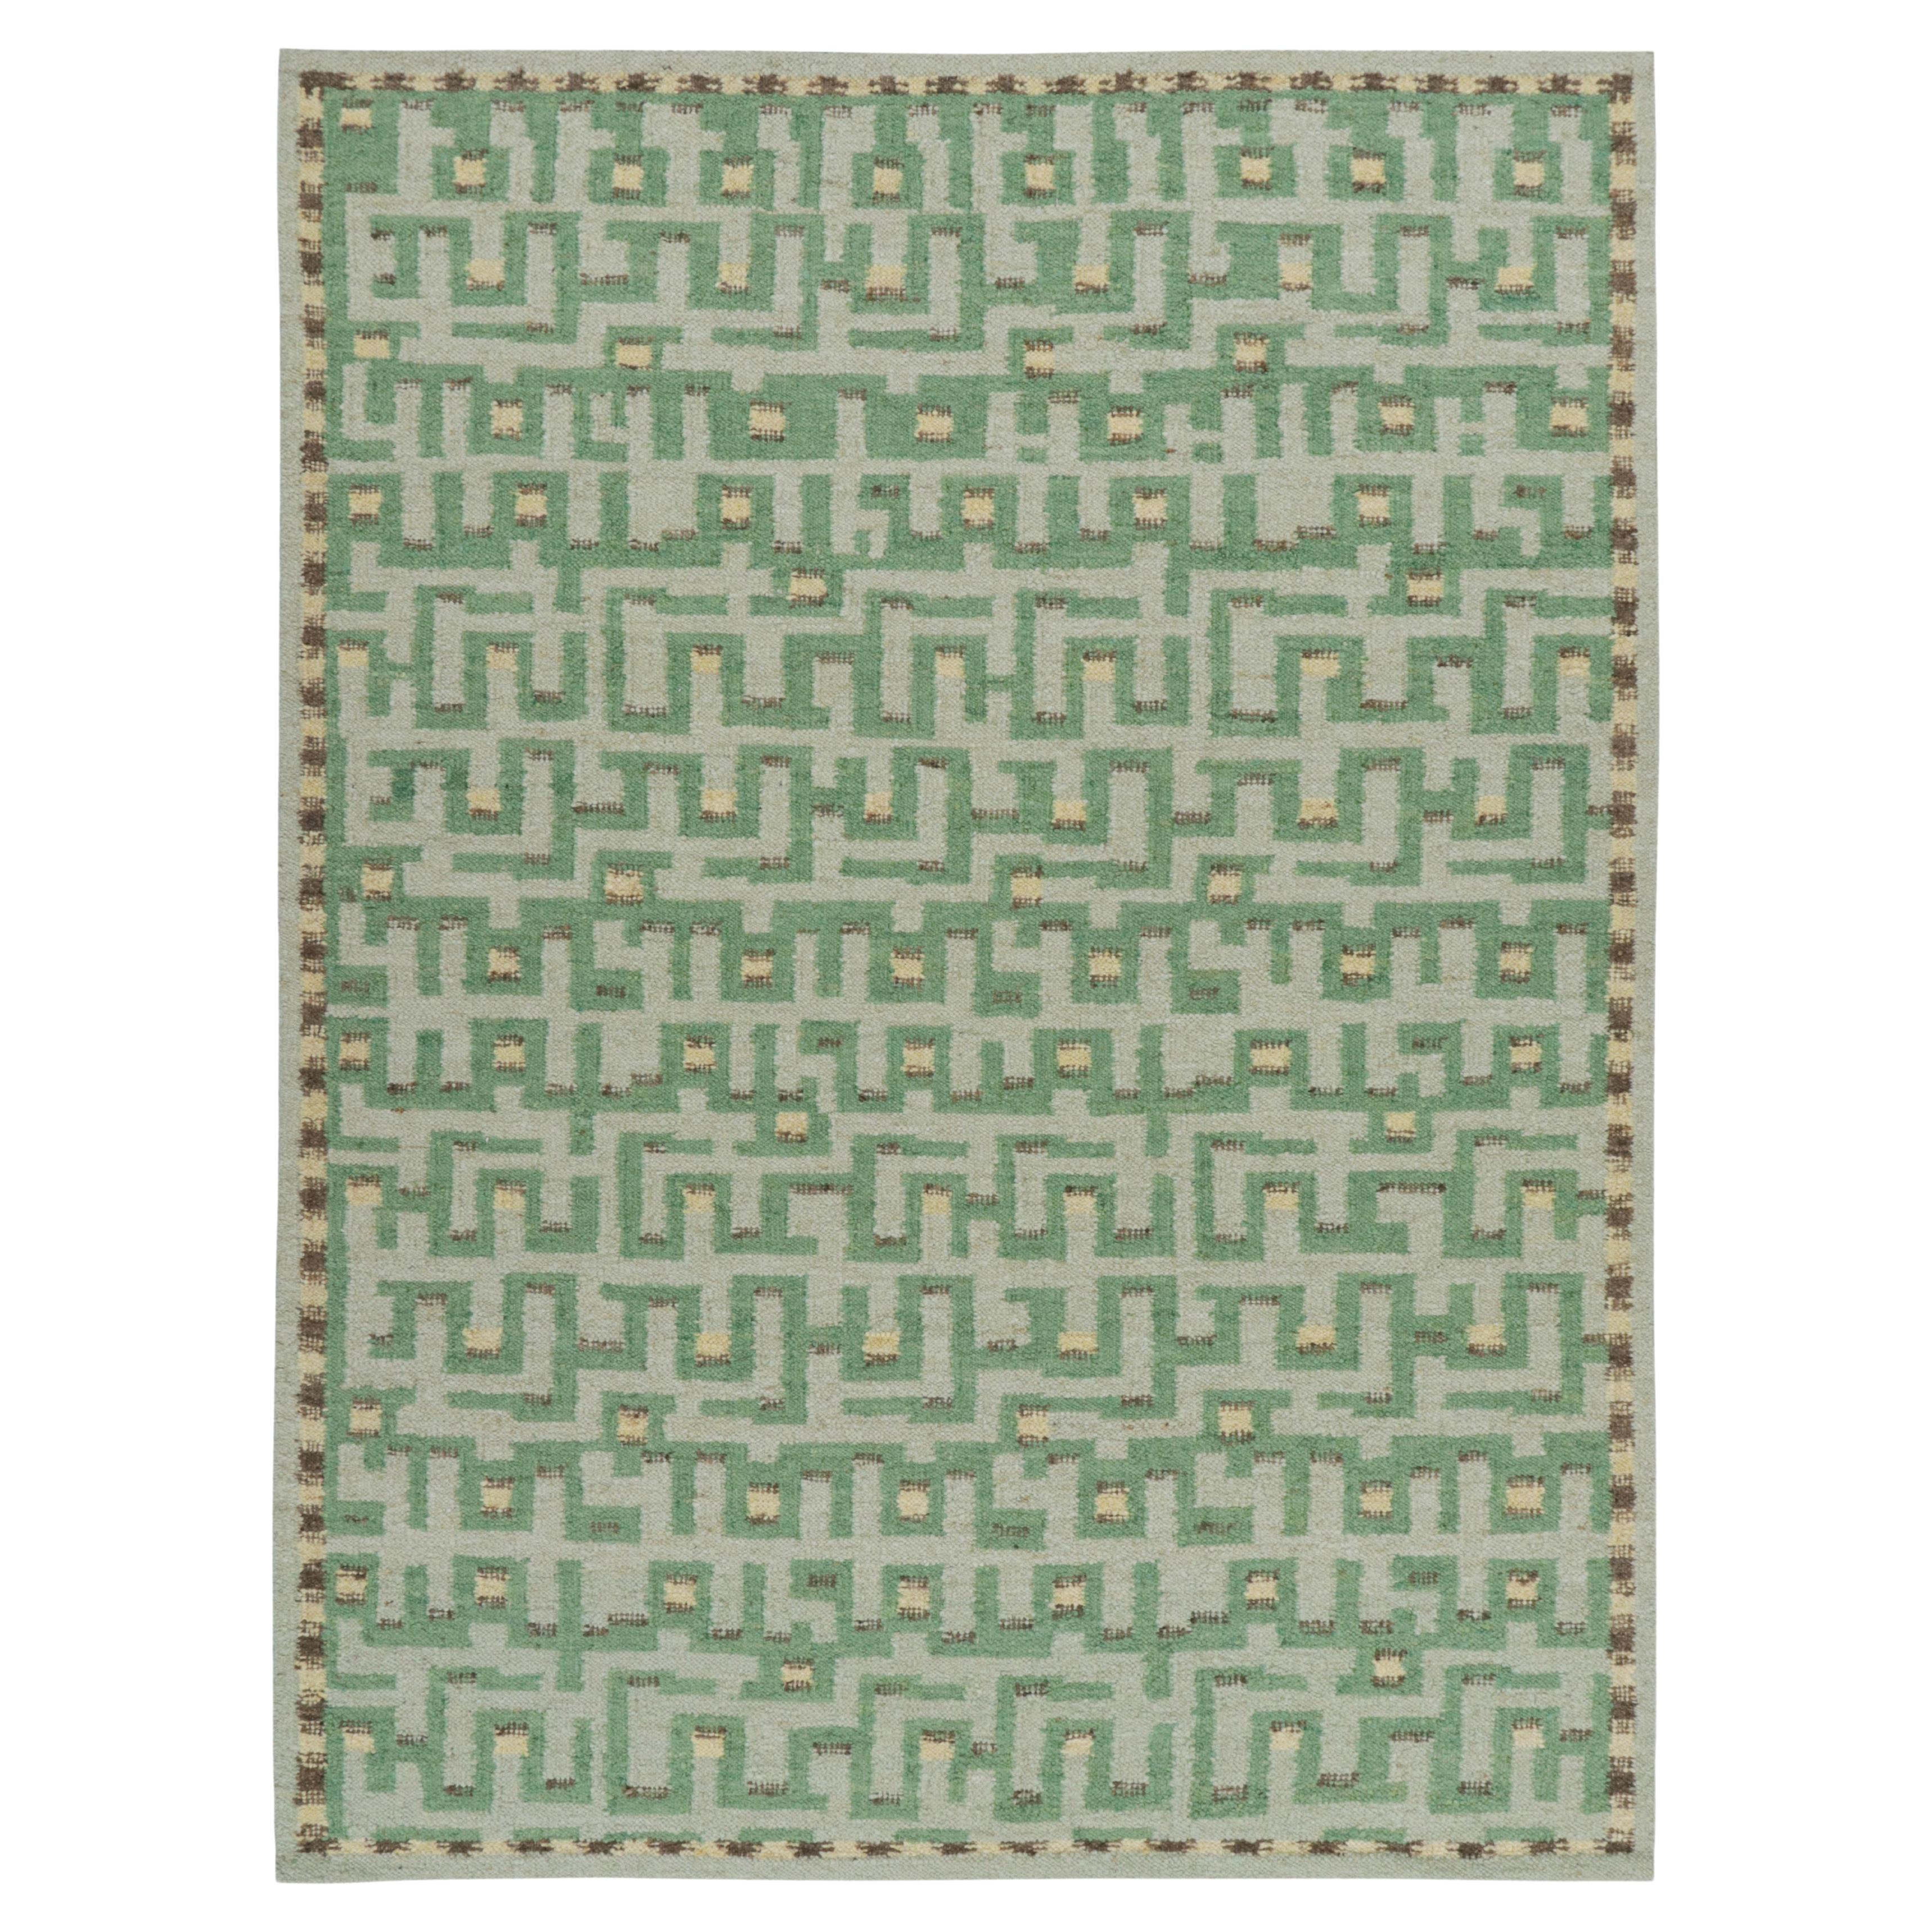 Rug & Kilim’s Scandinavian Style Rug in Green Tones with Geometric Patterns For Sale